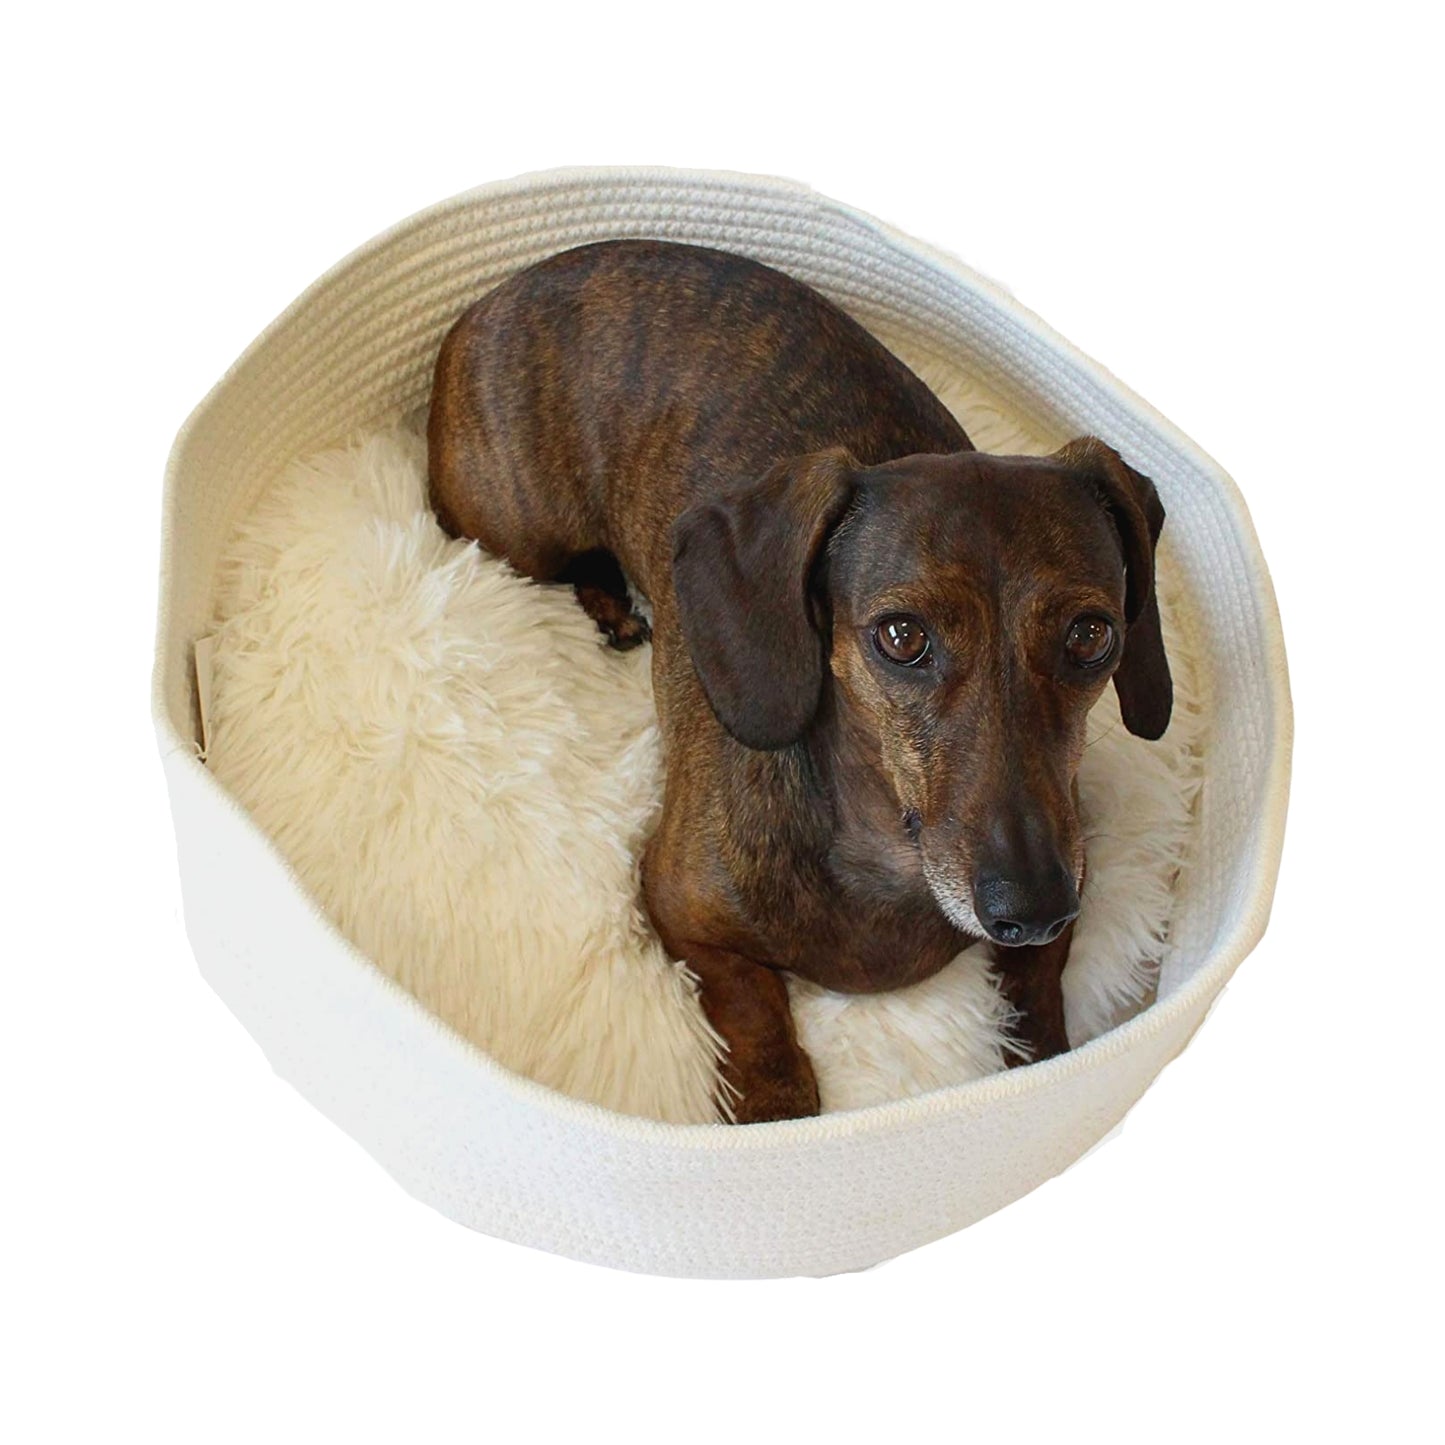 Midlee Round Rope Cat or Small Dog Bed with Pillow Insert